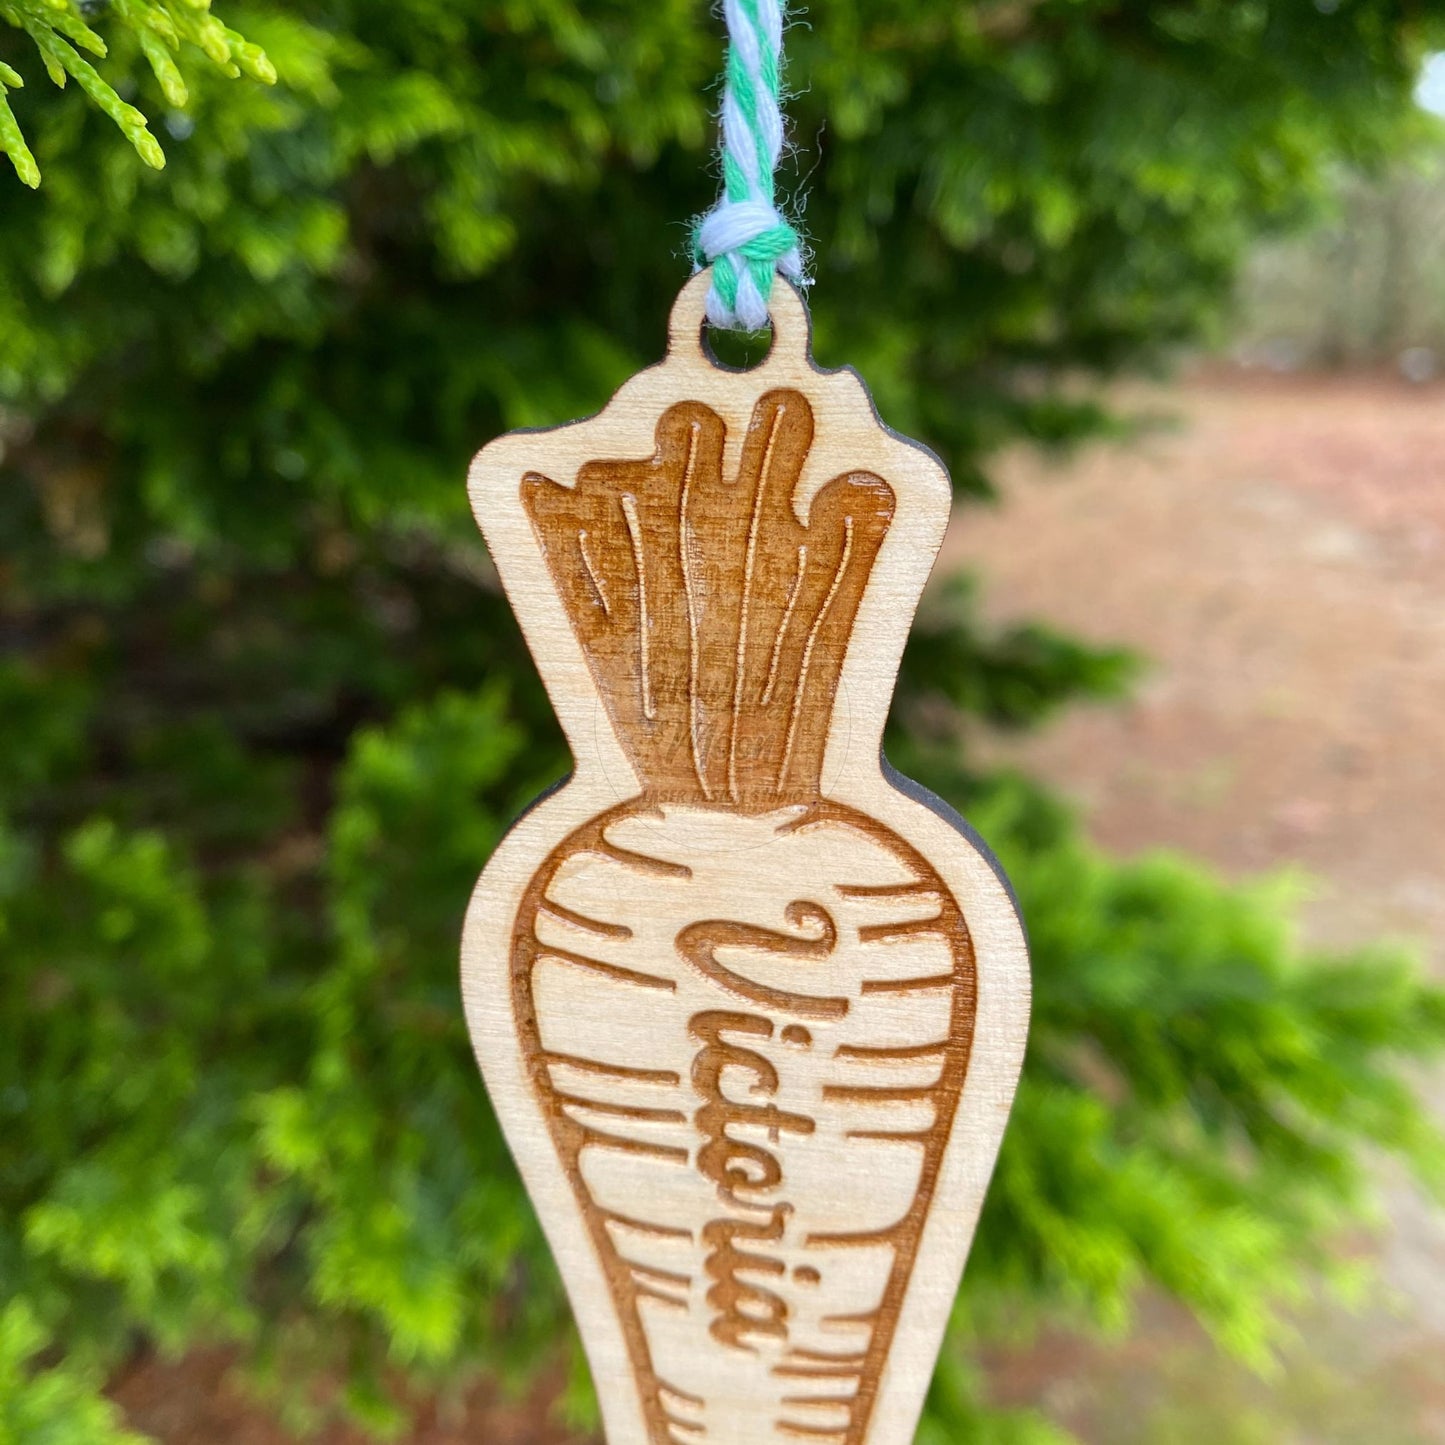 Close up of Personalized carrot ornament from Howling Moon Laser Design in Virginia USA.